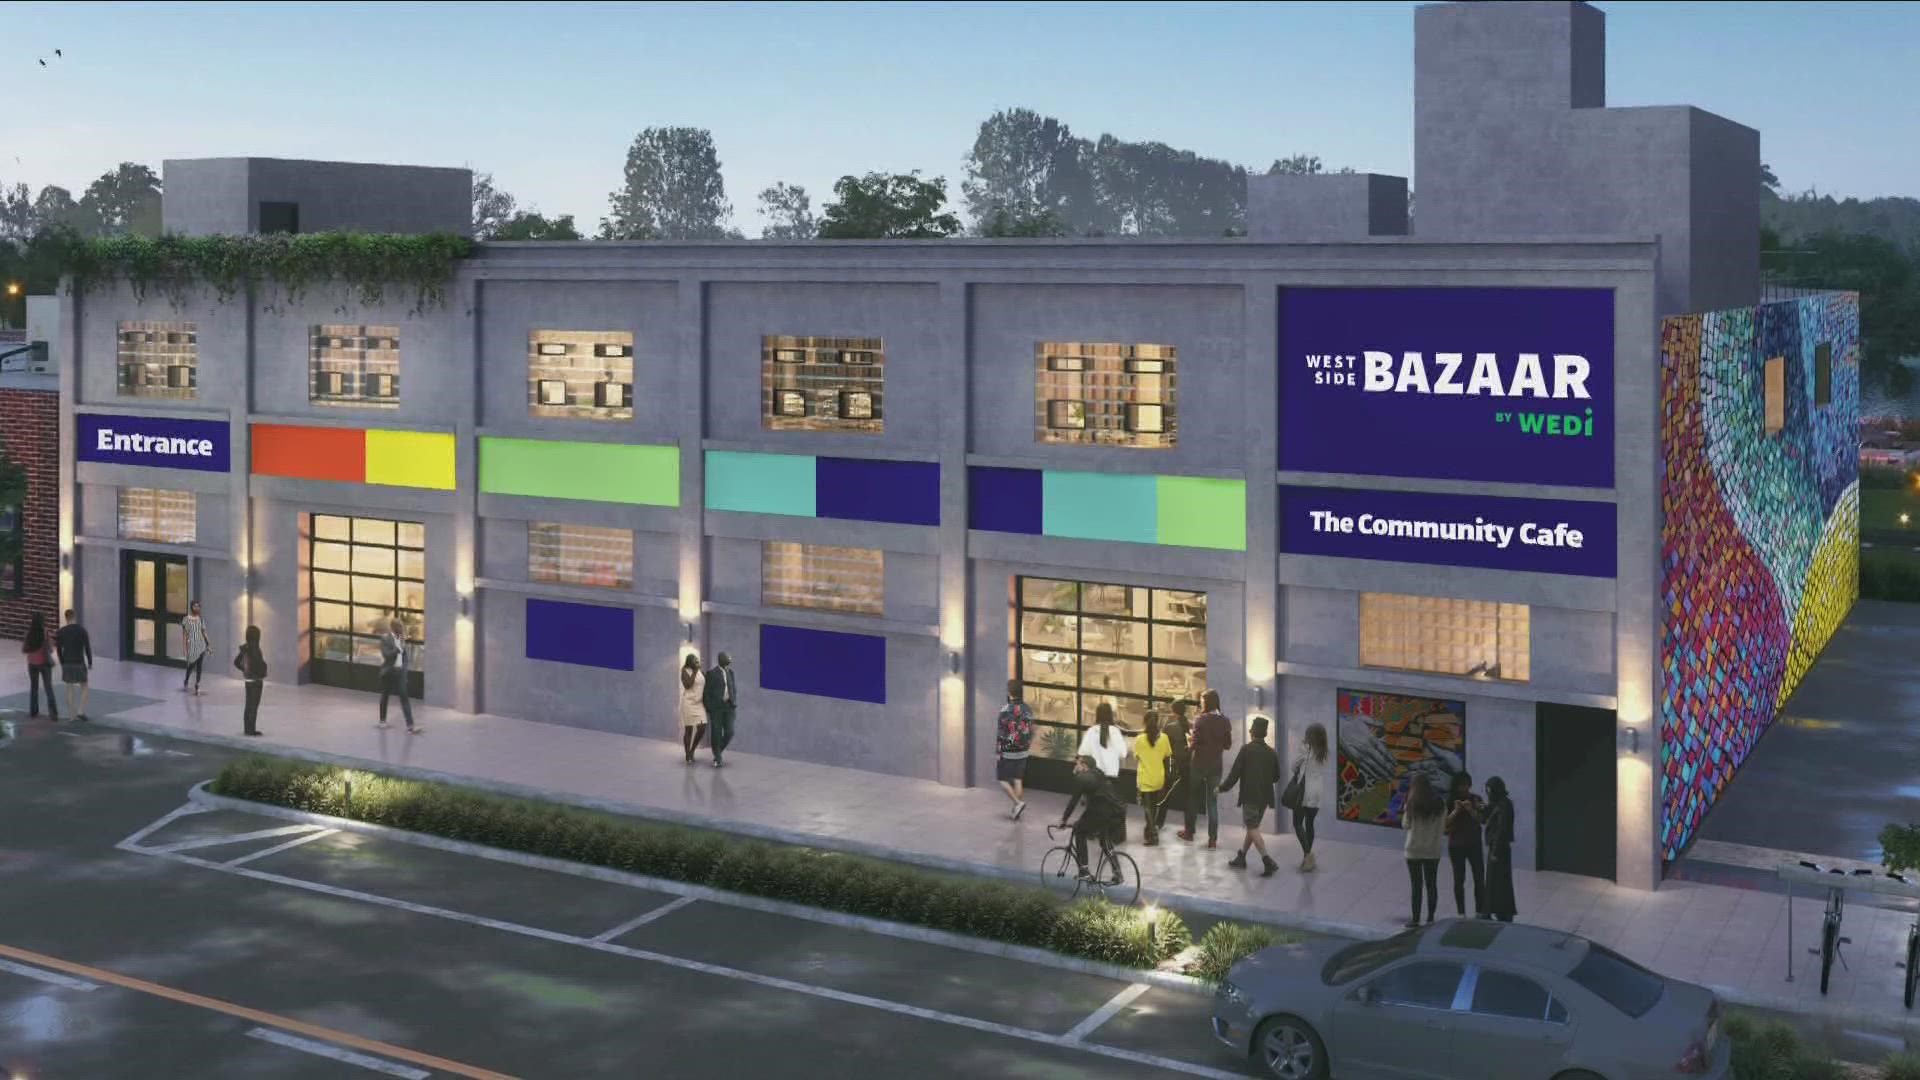 The new Bazaar will be five times bigger than the old one was.